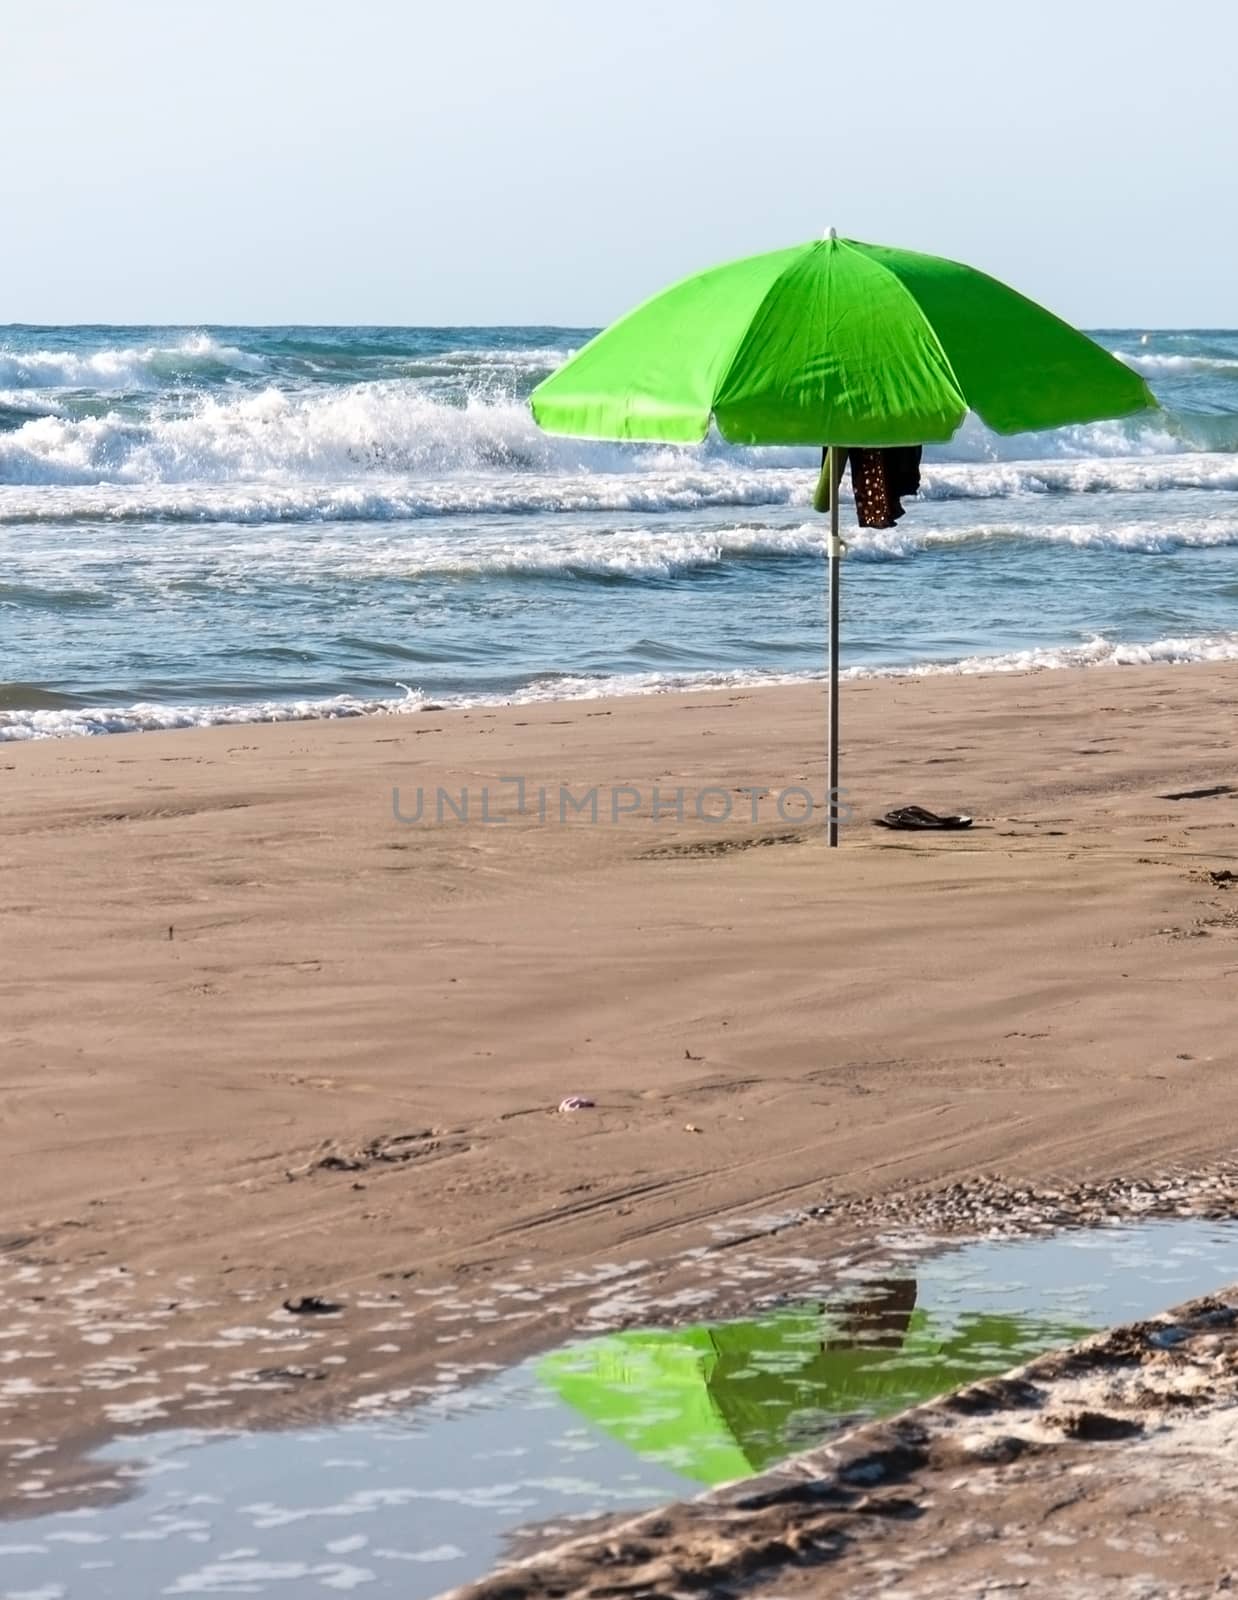 Green umbrella with reflection in pool of water on a beach.